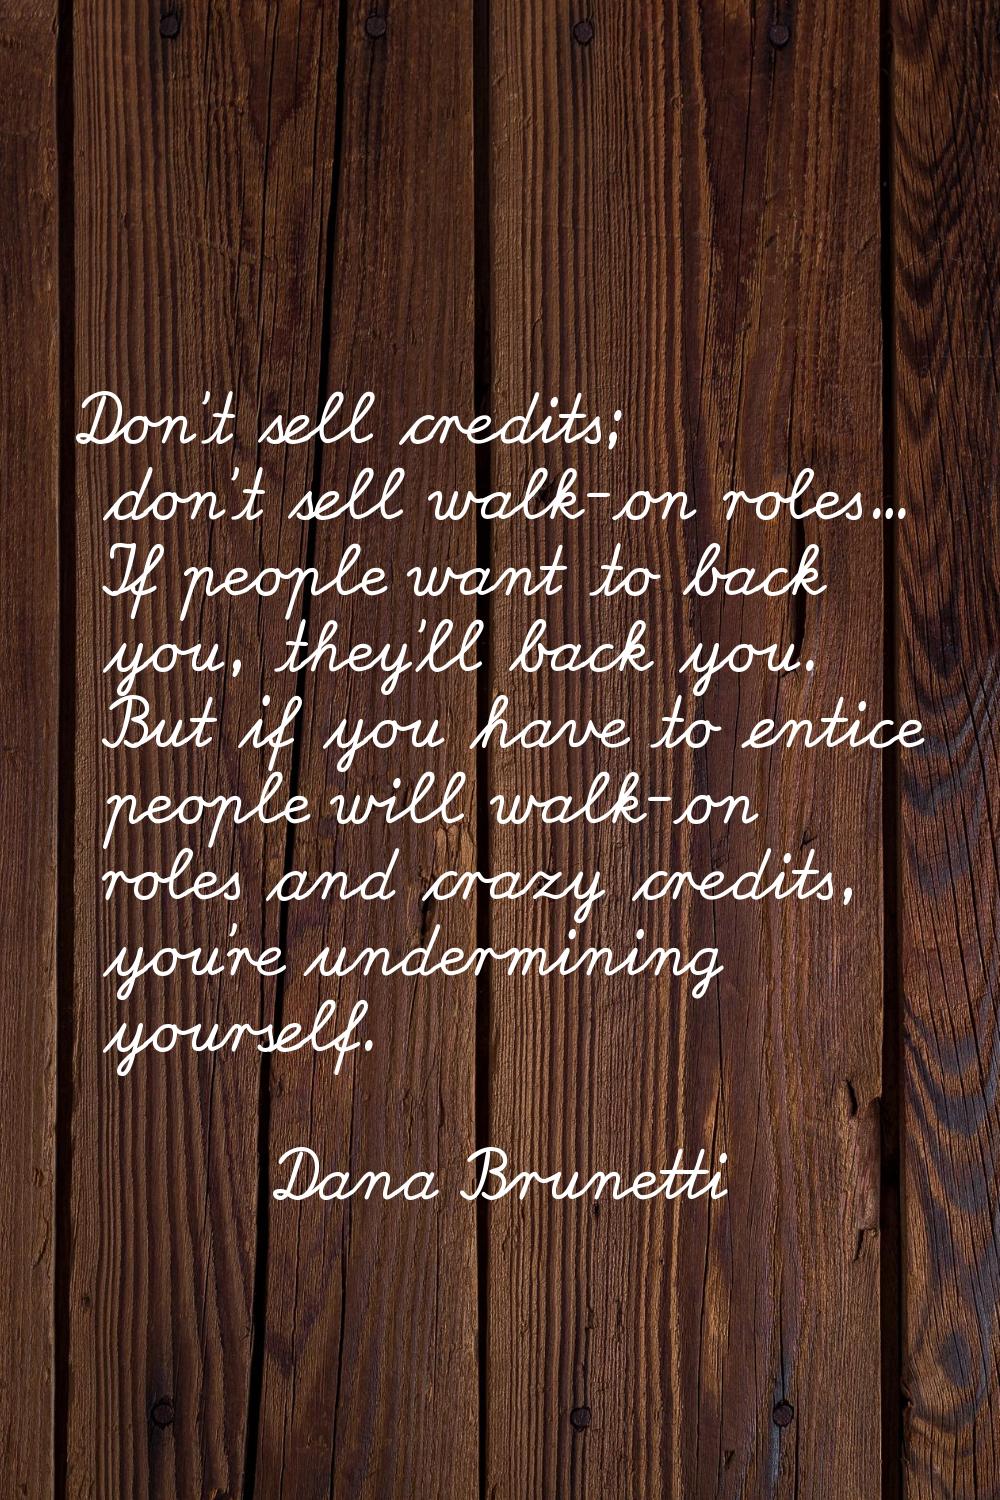 Don't sell credits; don't sell walk-on roles... If people want to back you, they'll back you. But i